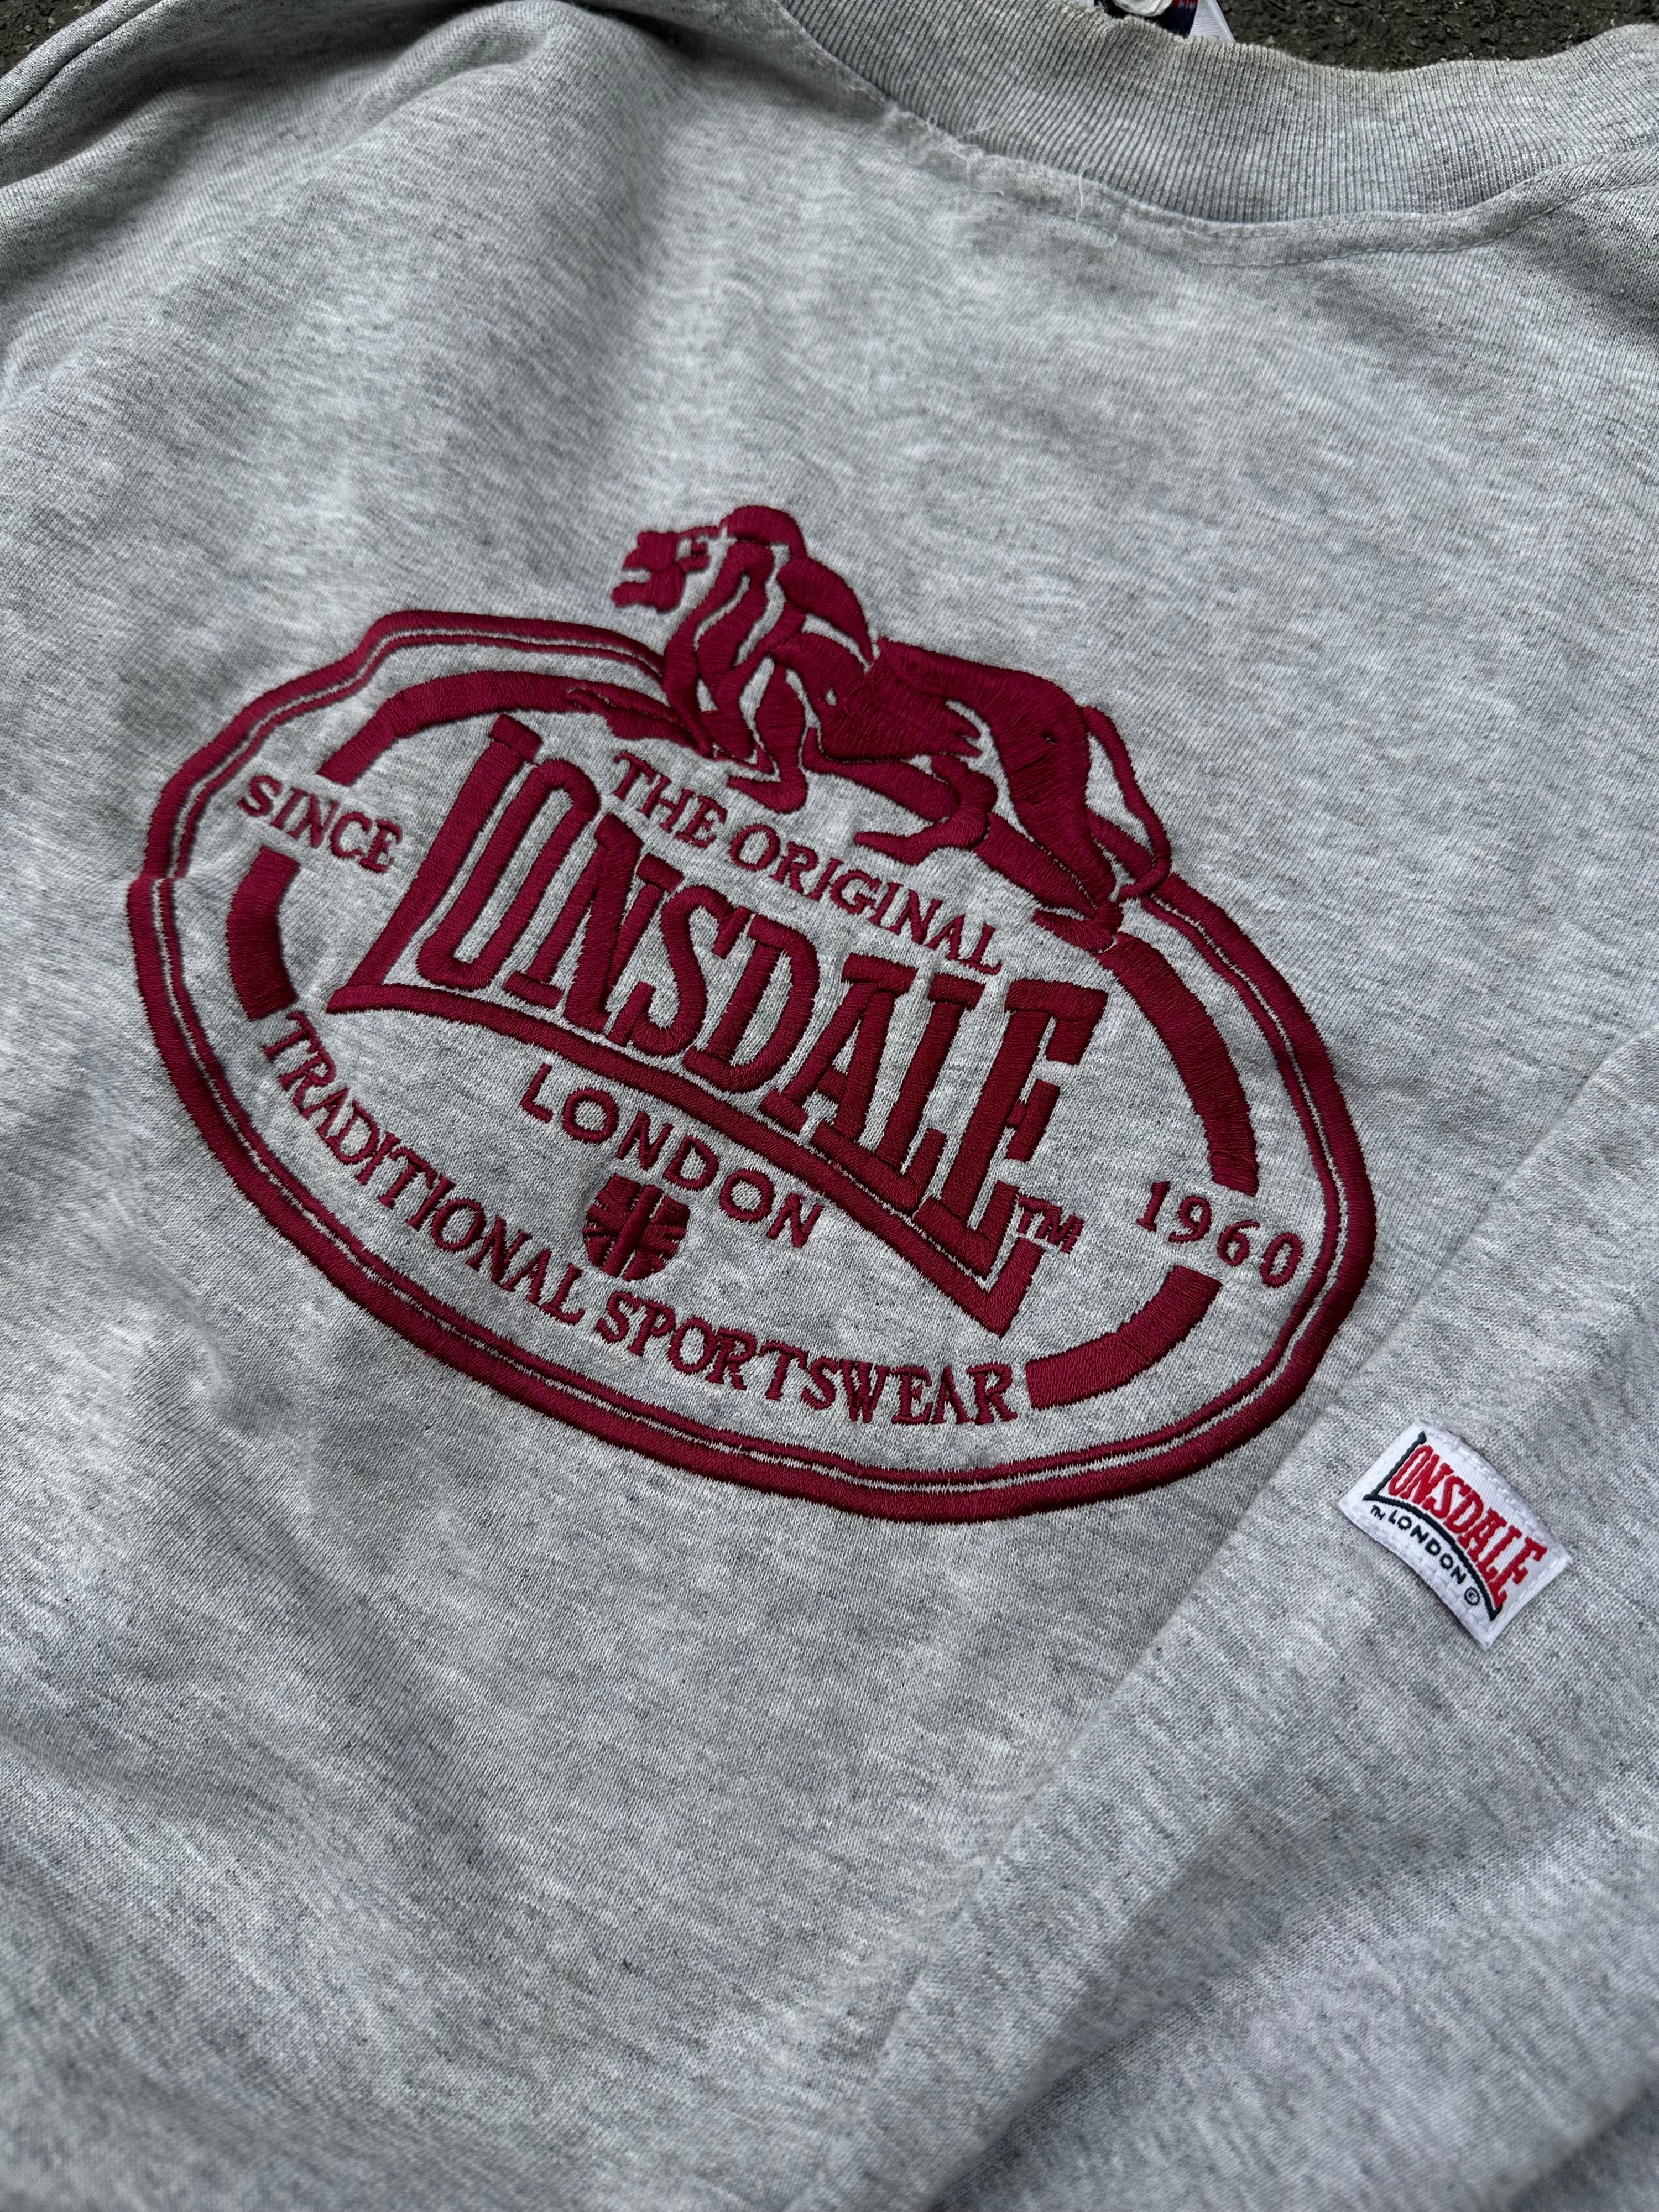 Vintage 90s Lonsdale Embroidered Sweater (L)